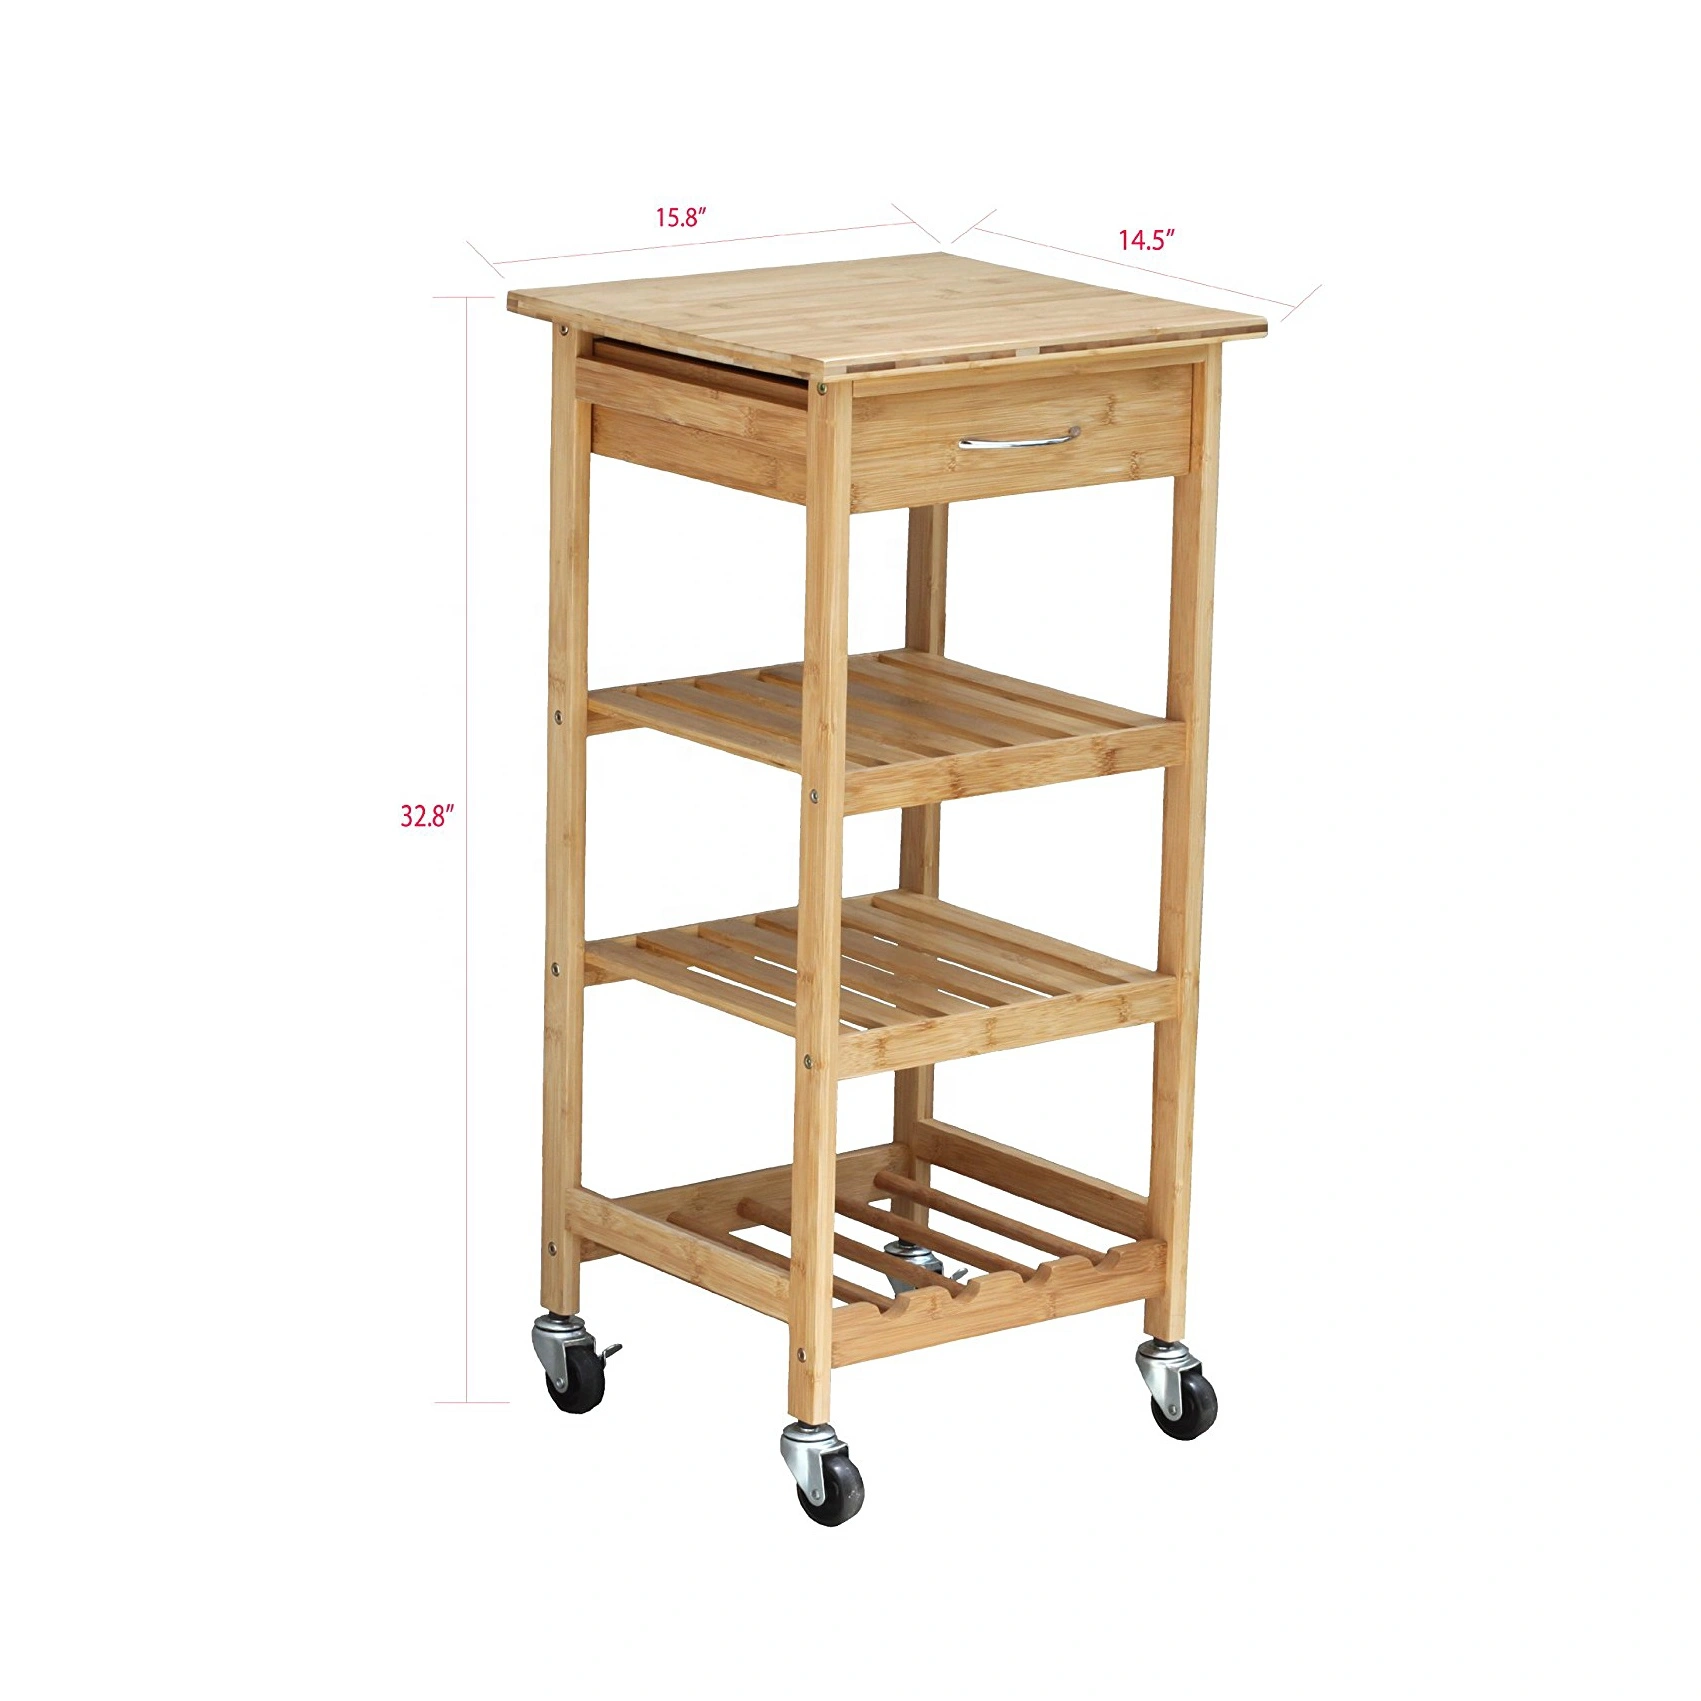 4 tiers bamboo wooden kitchen trolley kitchen cart